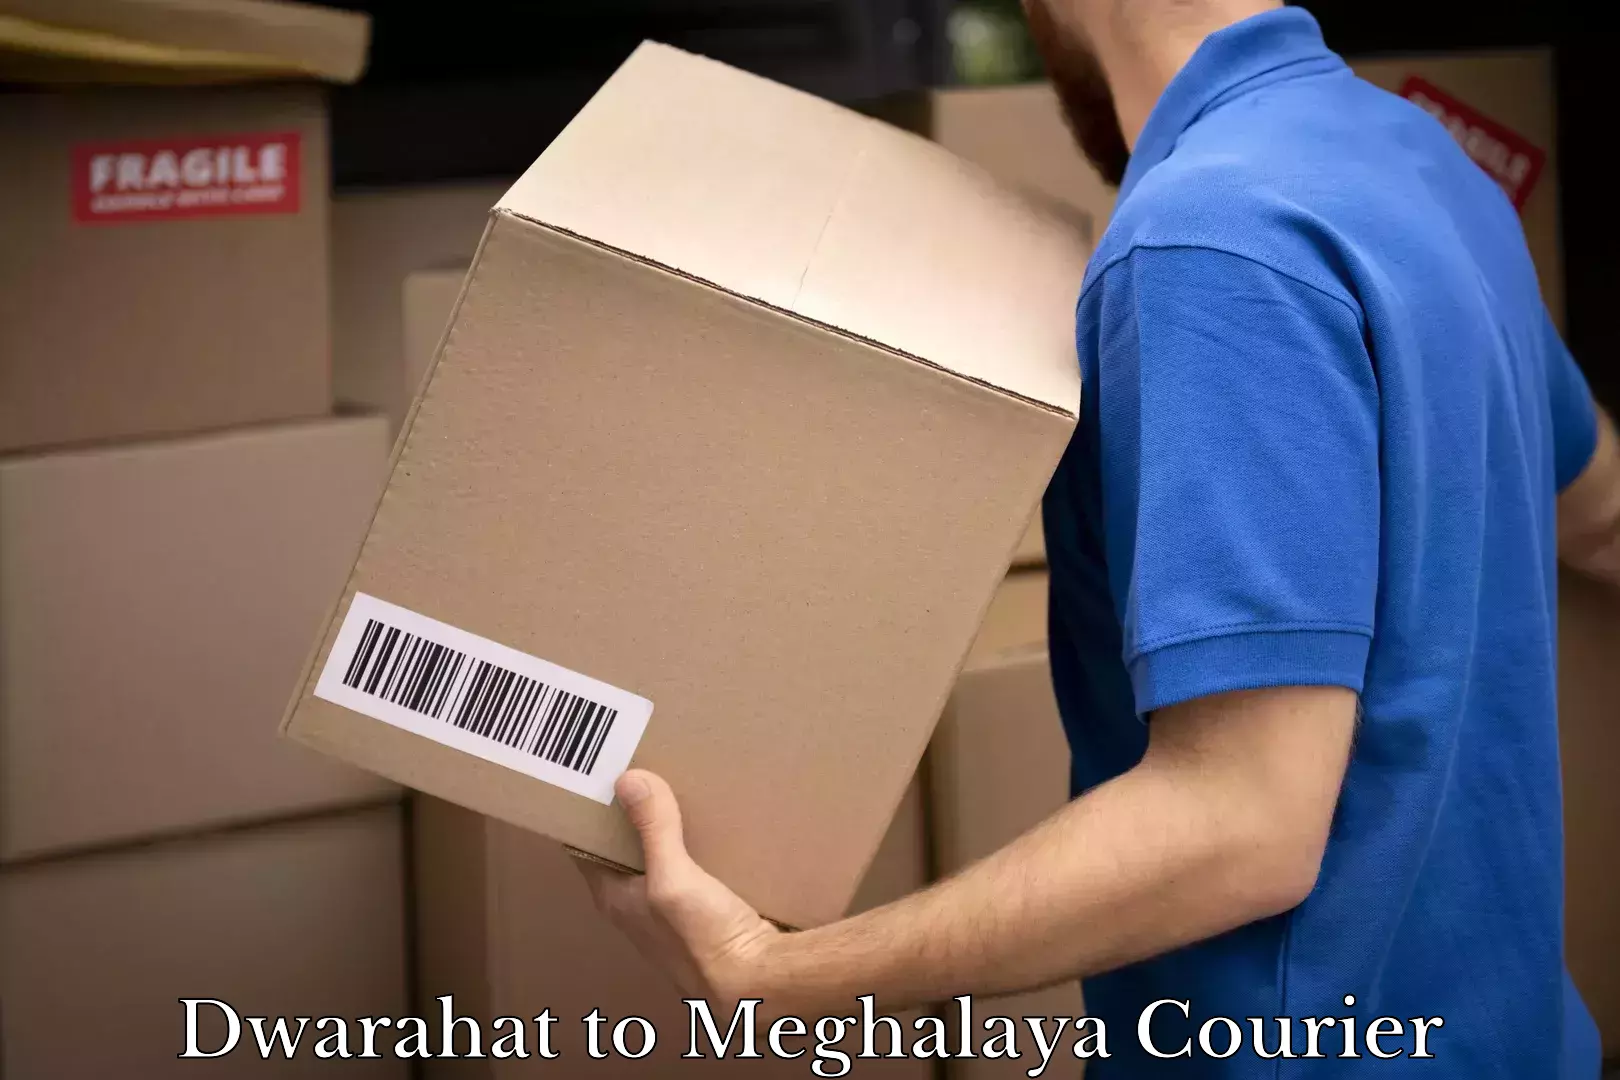 Reliable courier service Dwarahat to Meghalaya